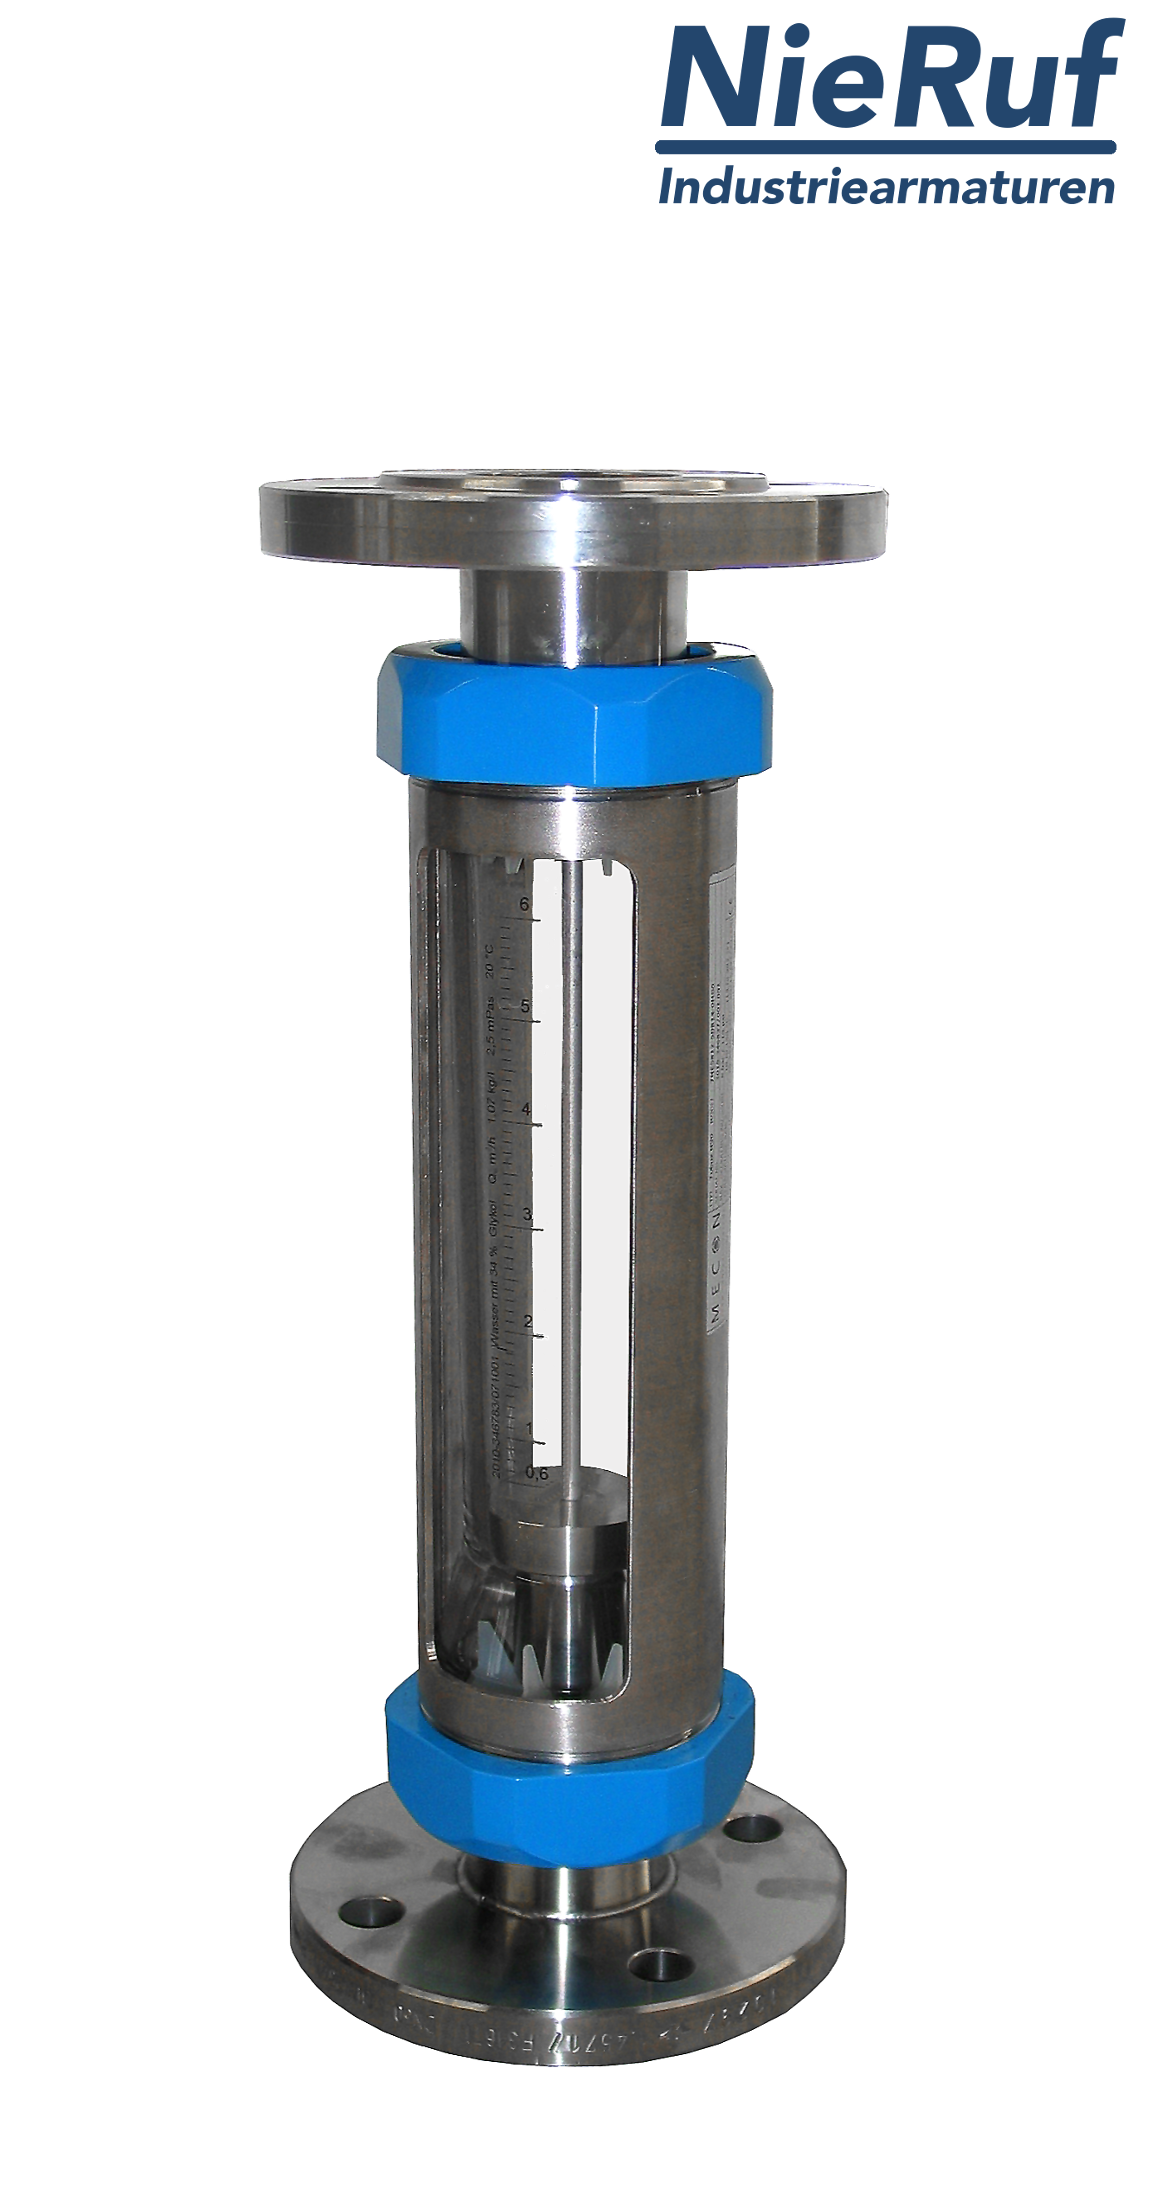 Variable area flowmeter stainless steel + borosilicate flange DN40 250.0 - 2500 l/h water FKM